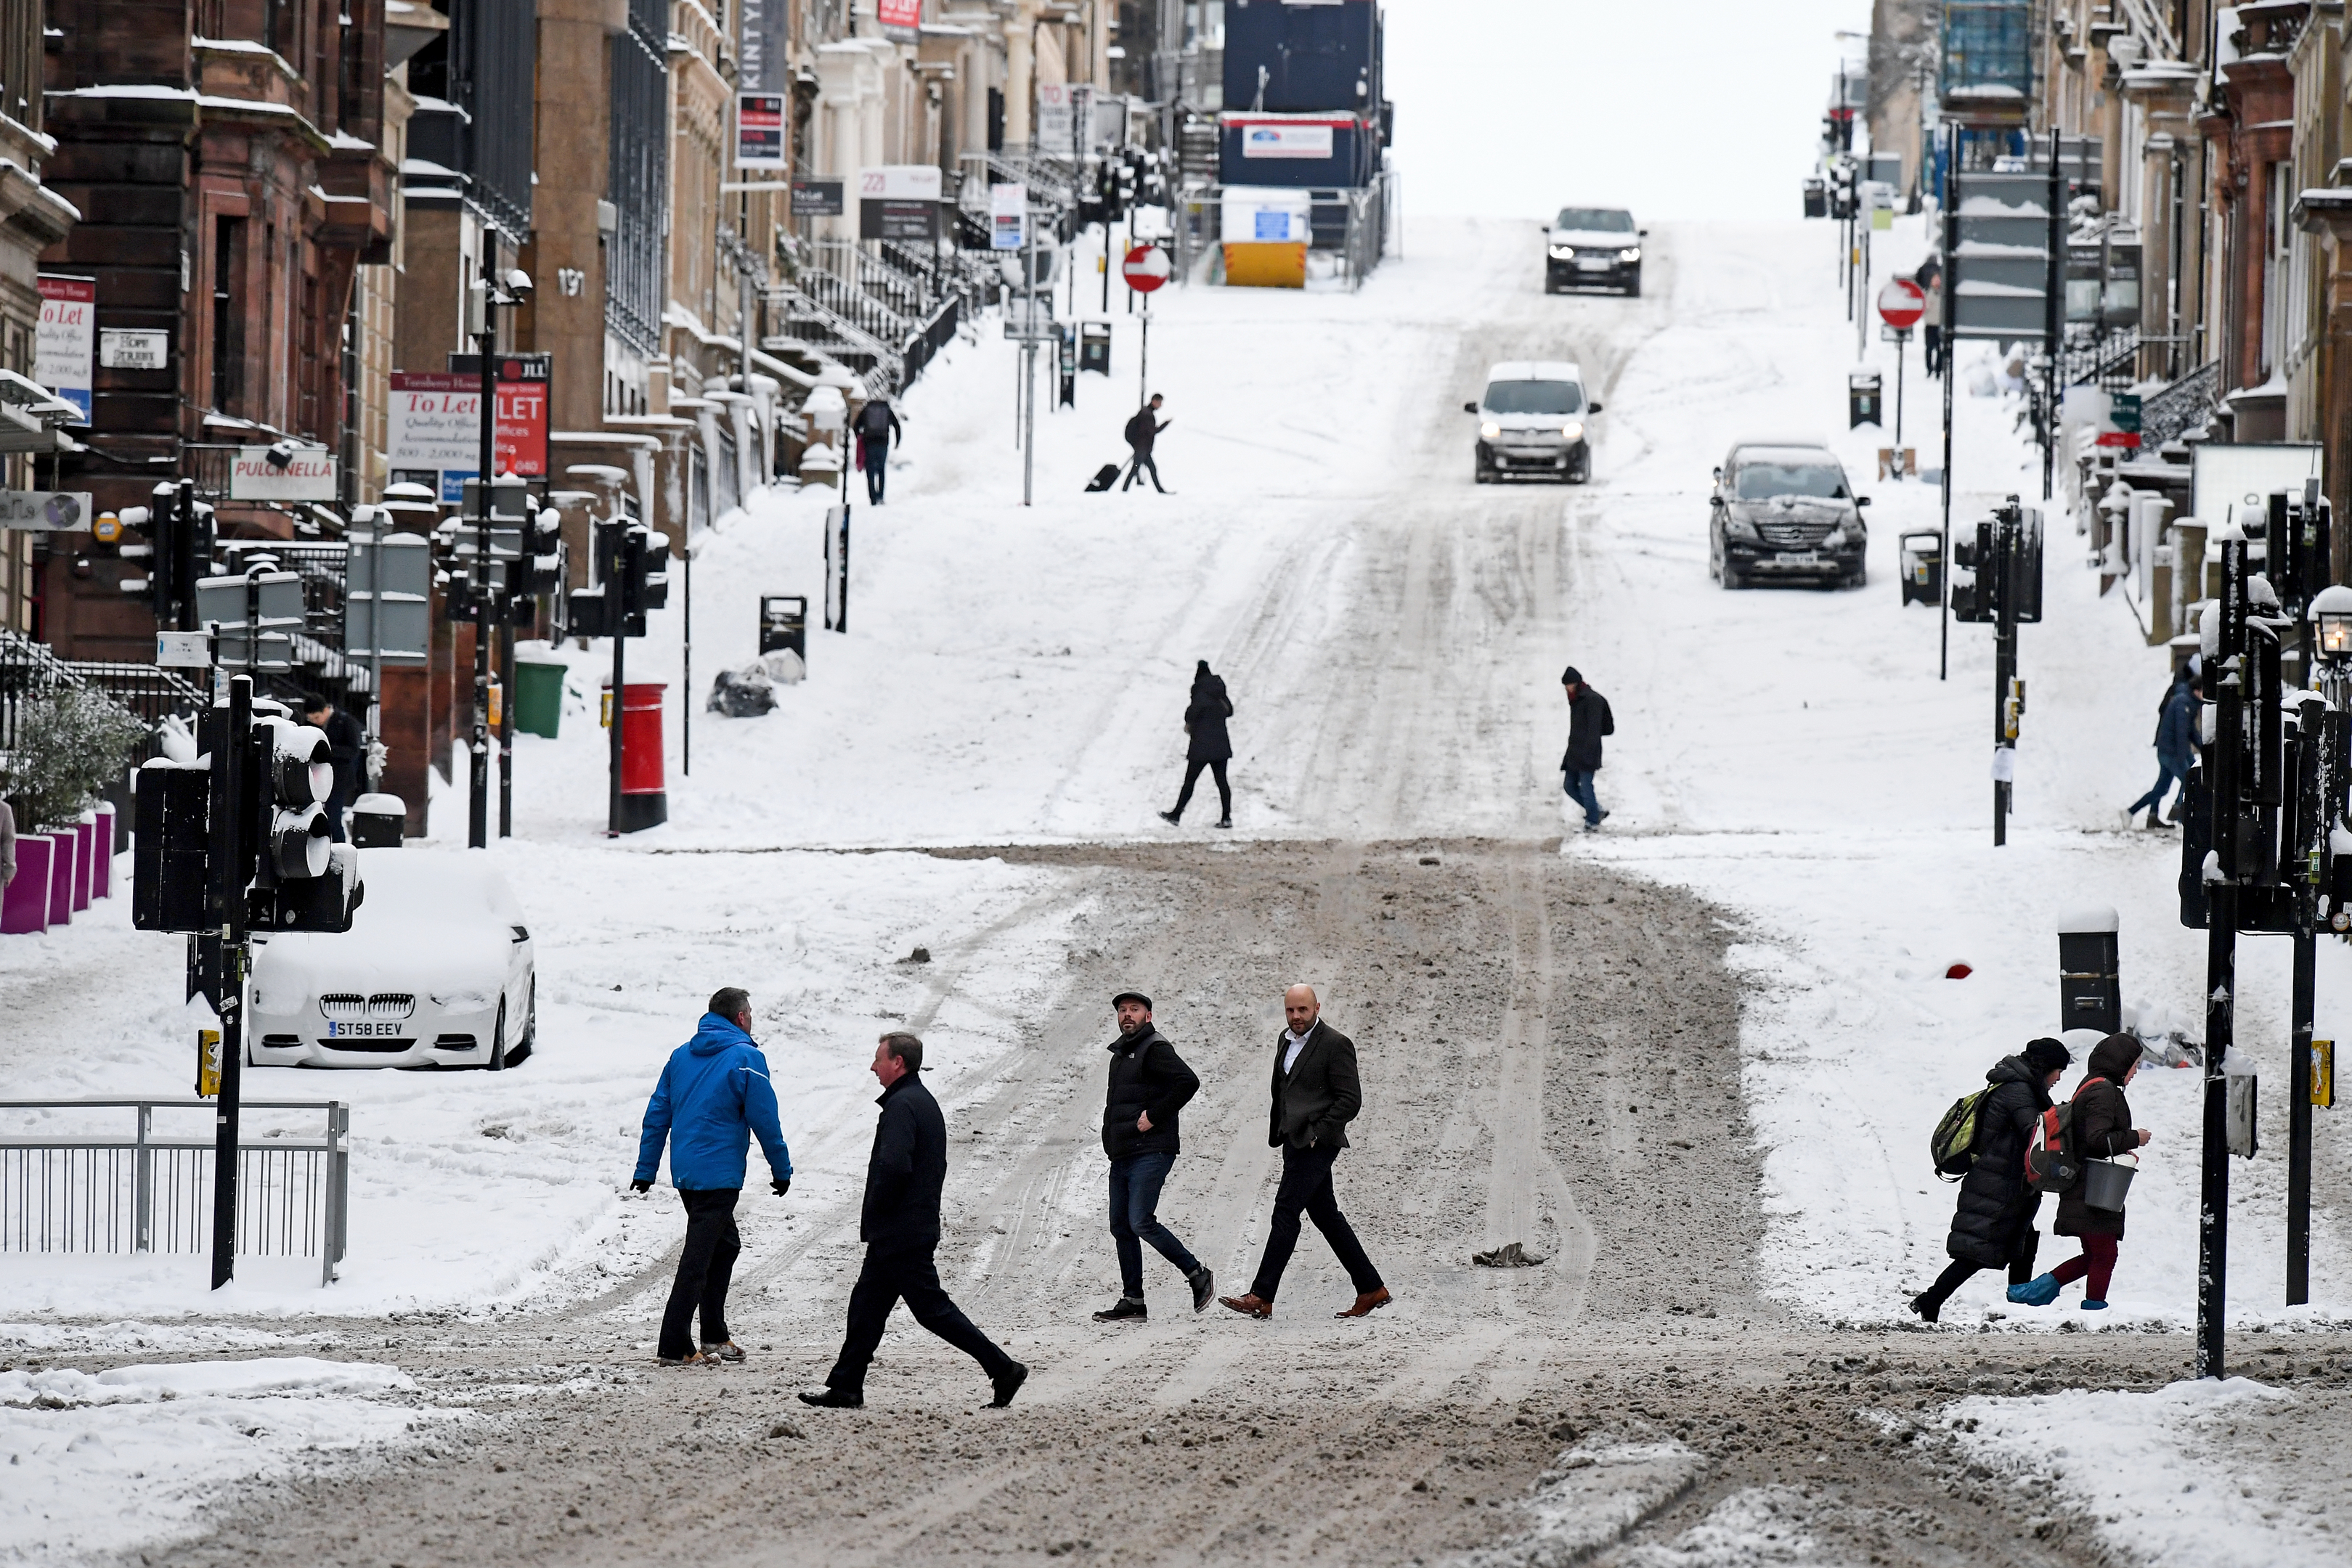 Members of the public make their way across West George Street on February 28, in Glasgow, Scotland. Freezing weather conditions dubbed the 'Beast from the East' bring snow and sub-zero temperatures to the UK (Jeff J Mitchell/Getty Images)